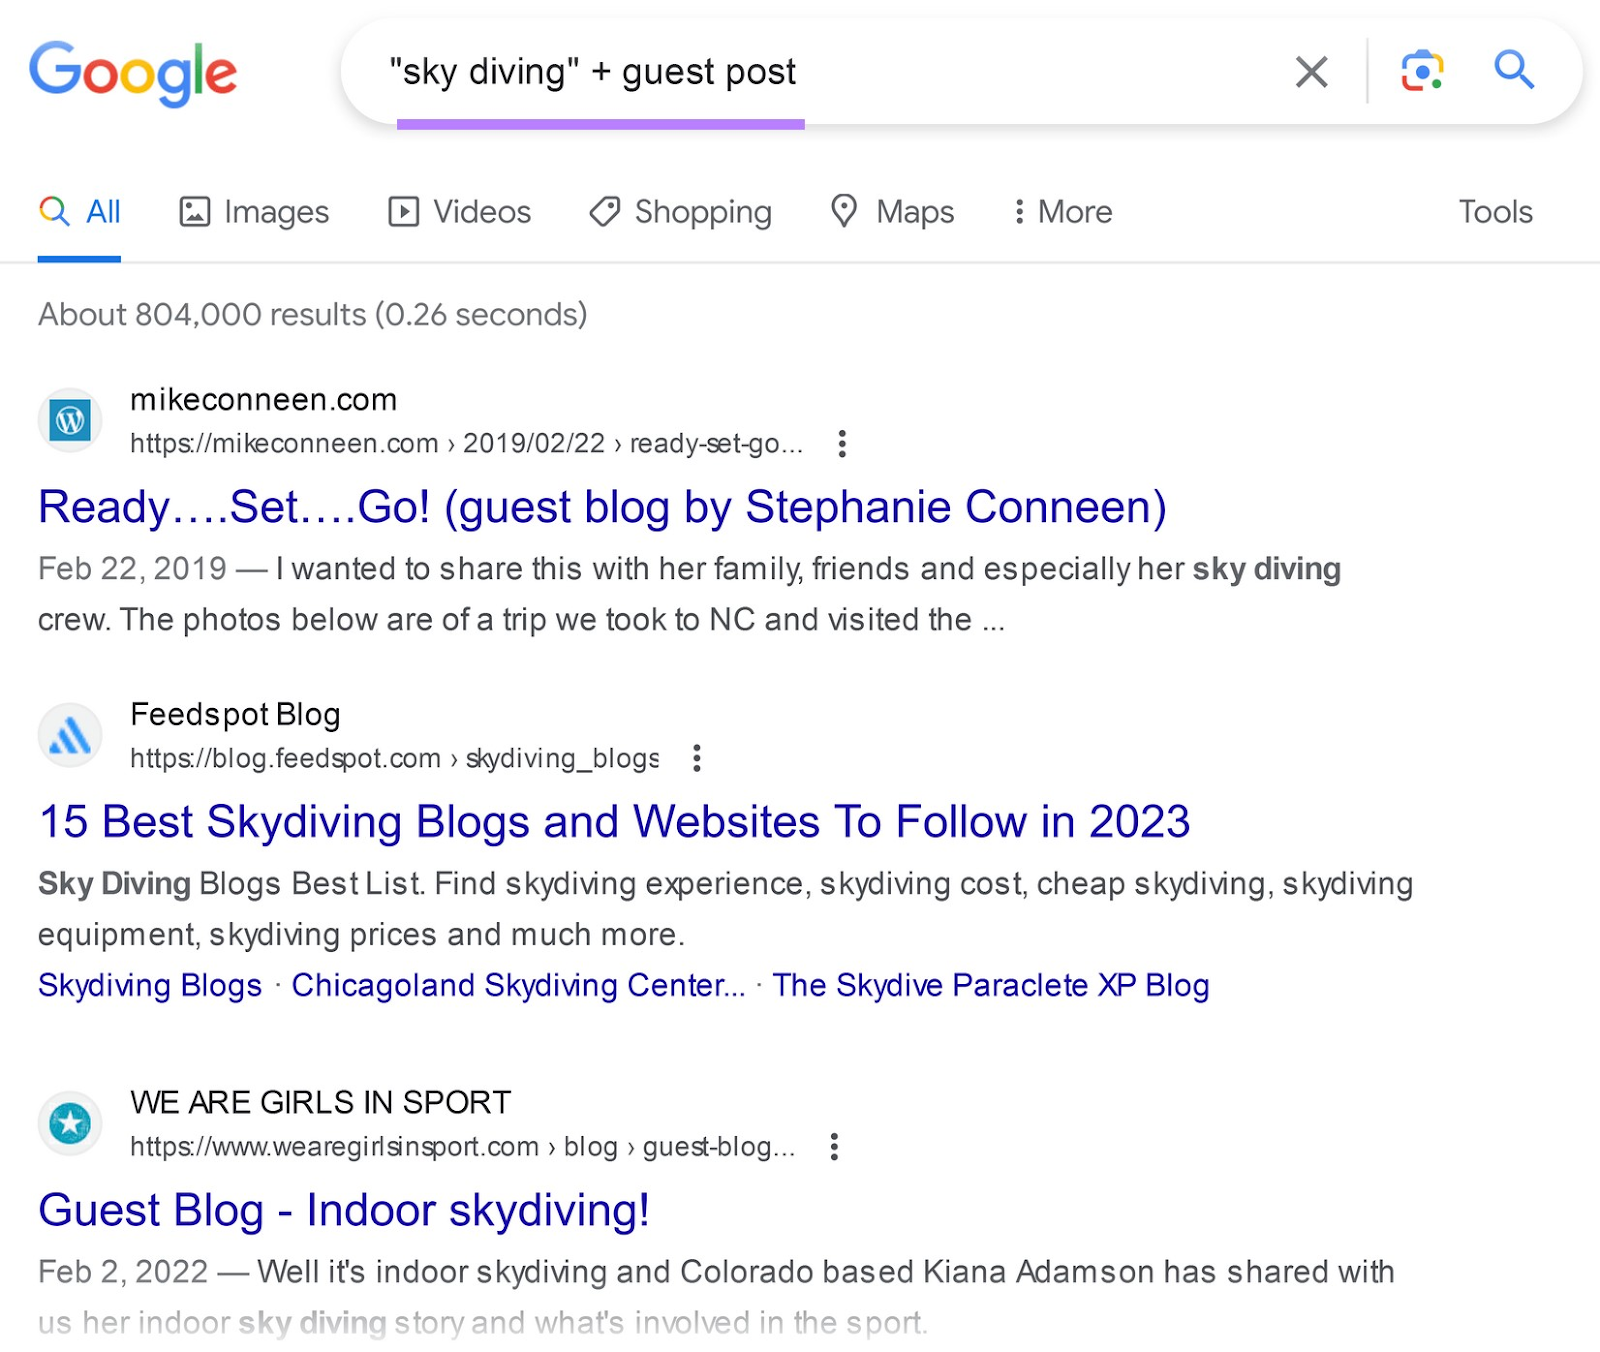 Google SERP for “sky diving + guest post” query